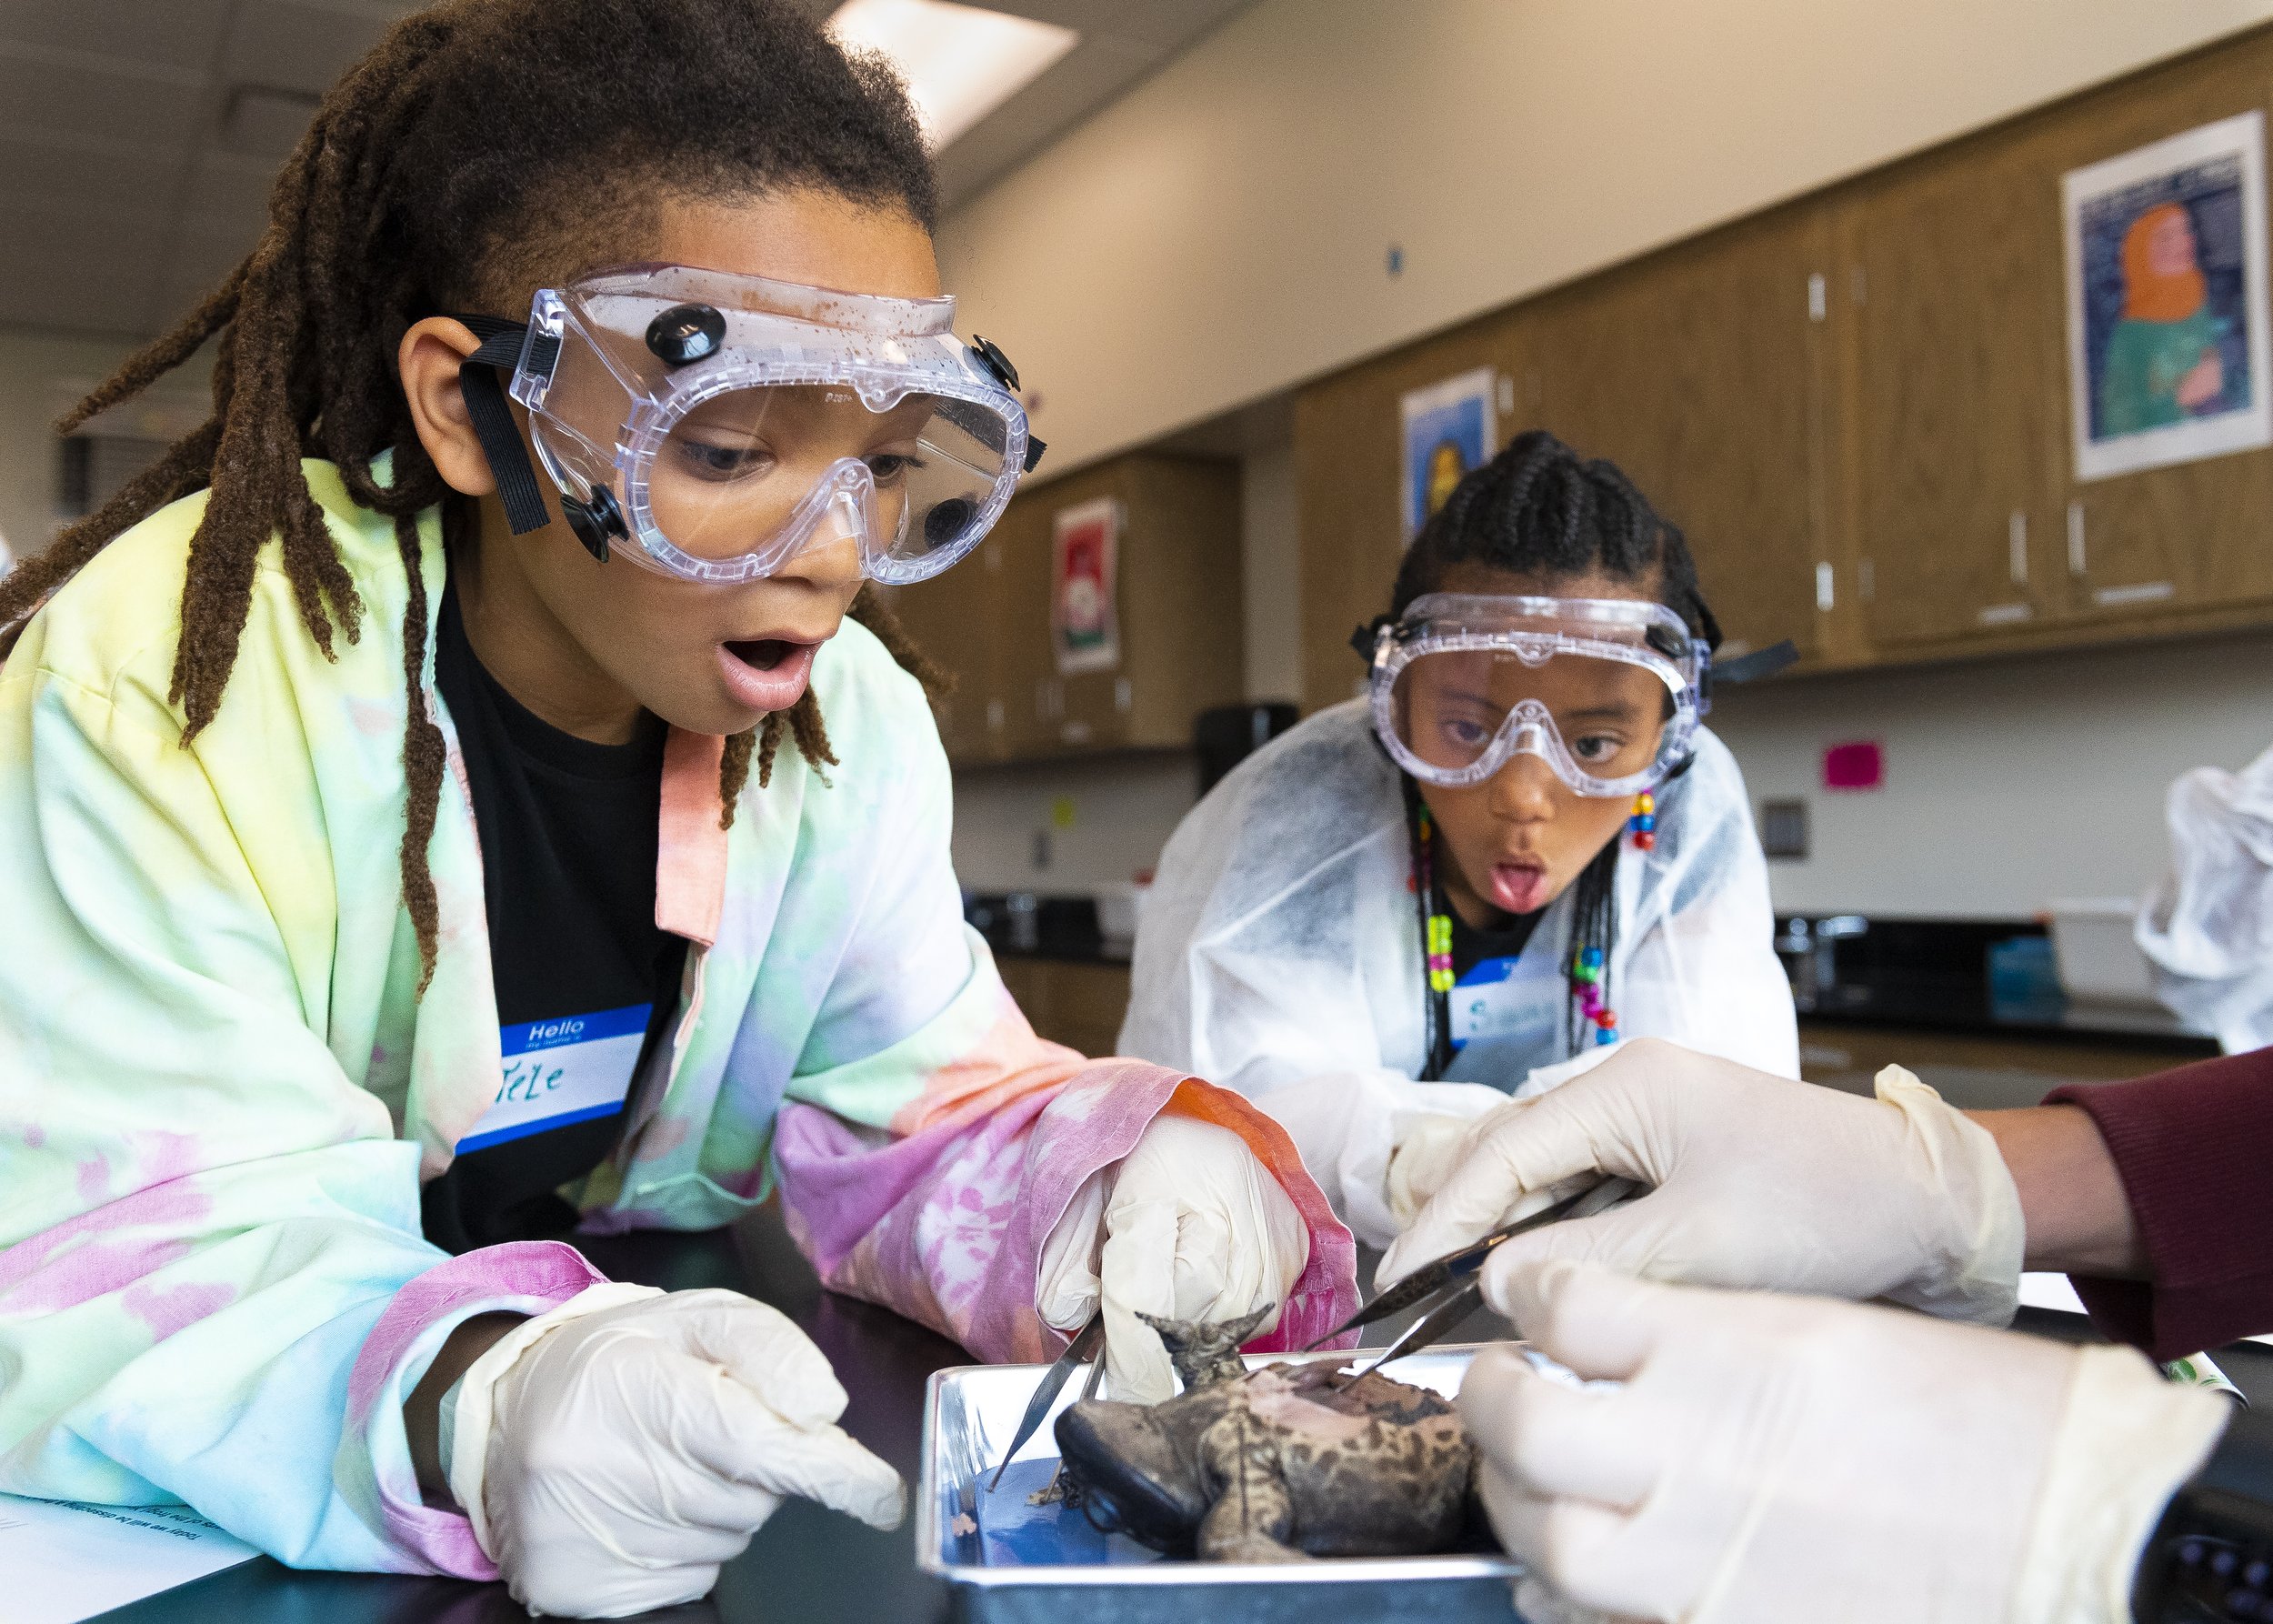  Tele Phillips and Saniyah Sims react as Science Focus Program student Henry Sline (from left) helps them to dissect a bullfrog during a hands-on learning experience for students from the Malone Center on Wednesday, April 19, 2023, at the Lincoln Chi